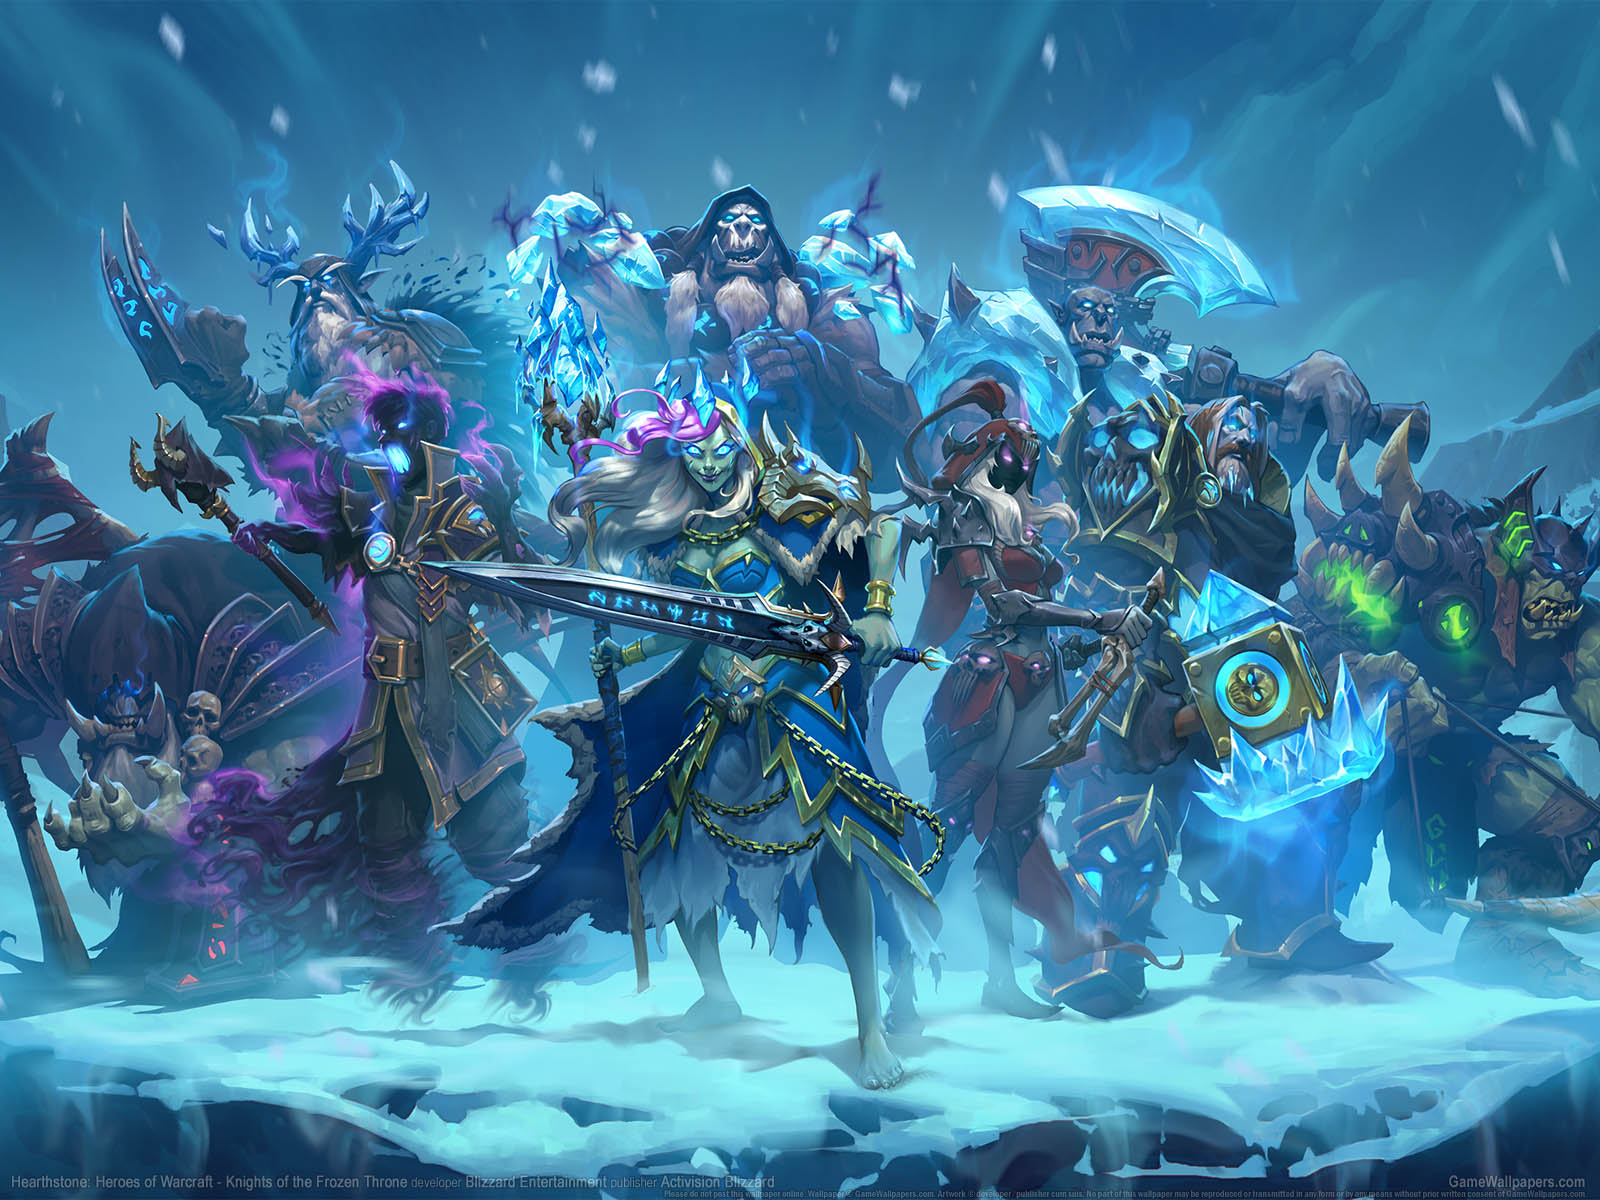 Hearthstone: Heroes of Warcraft - Knights of the Frozen Throneνmmer=02 achtergrond  1600x1200